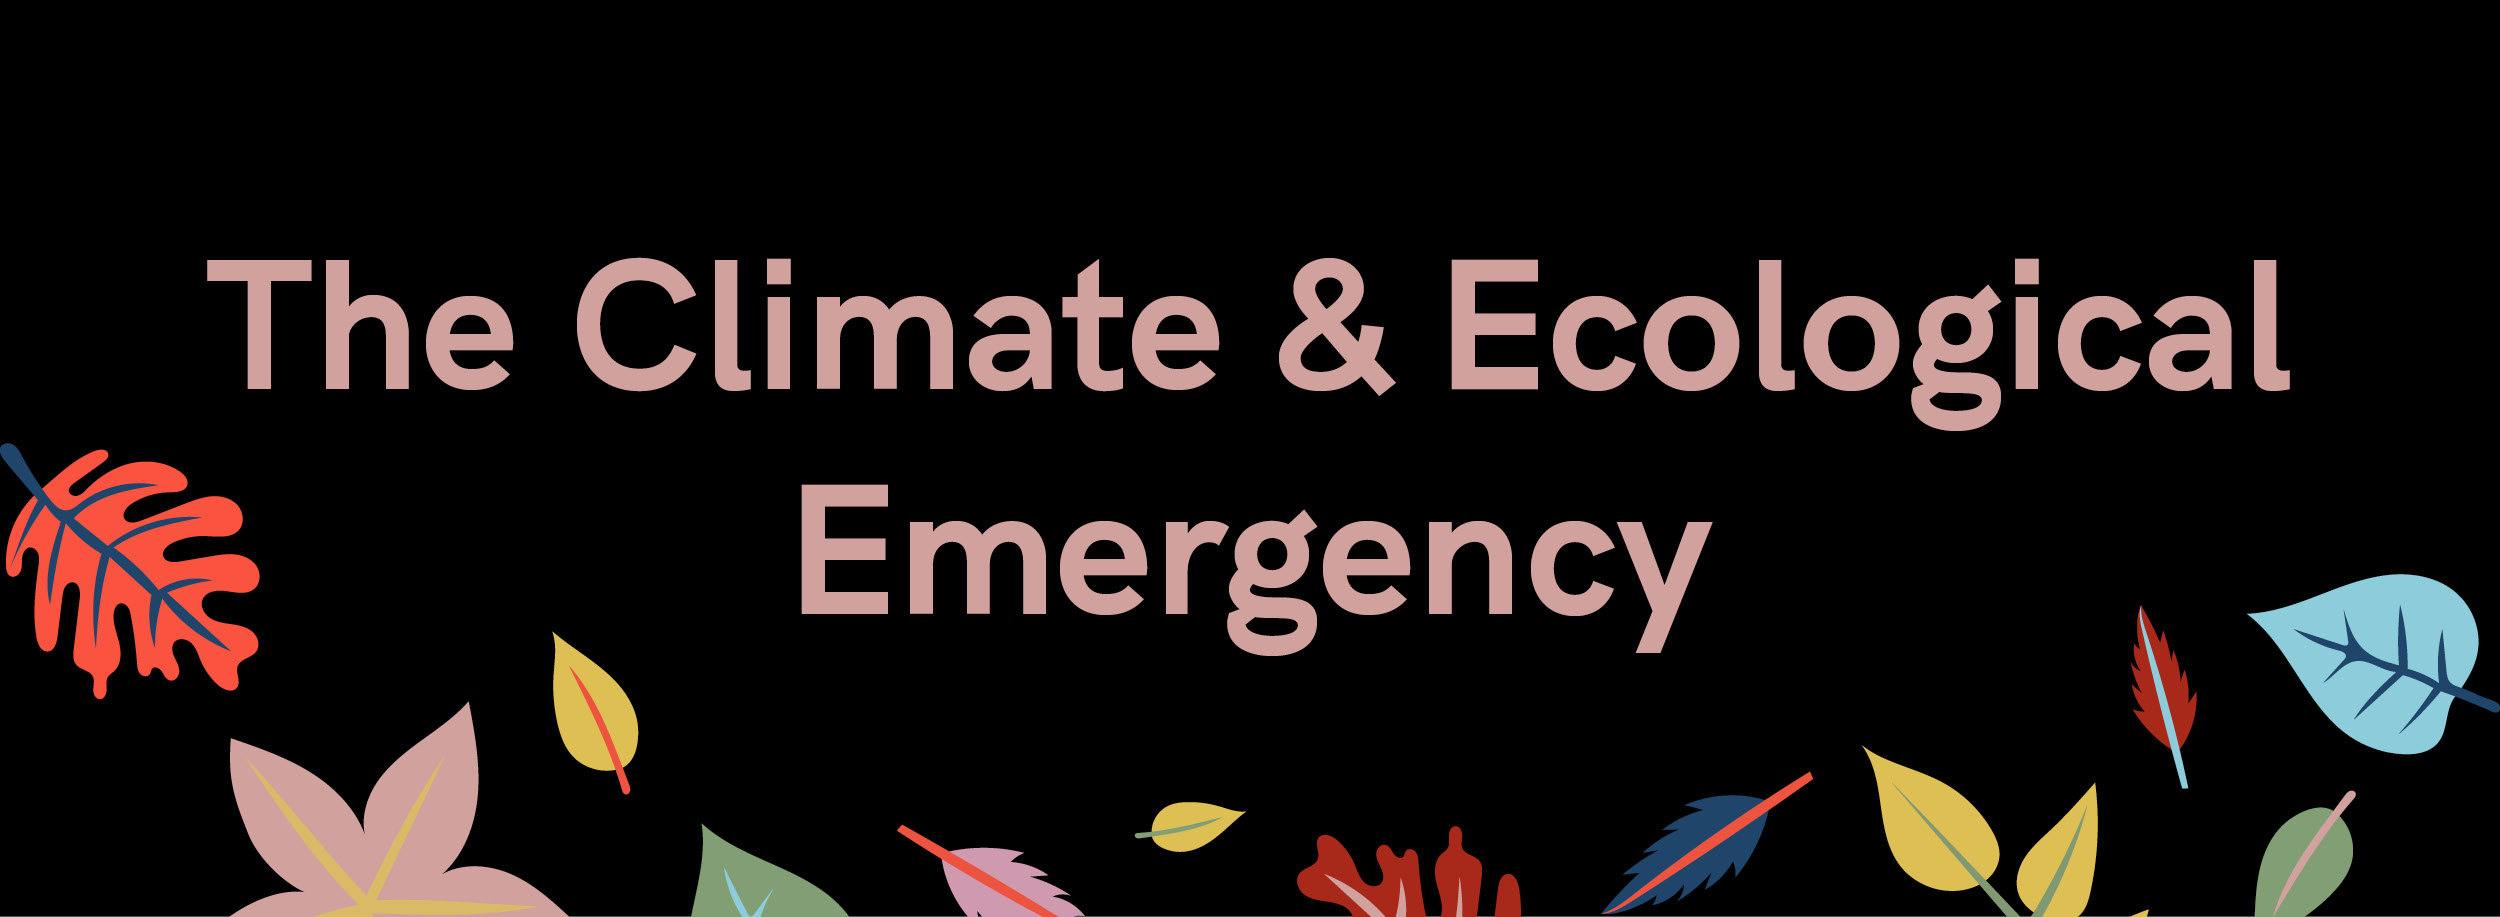 The Climate & Ecological Emergency